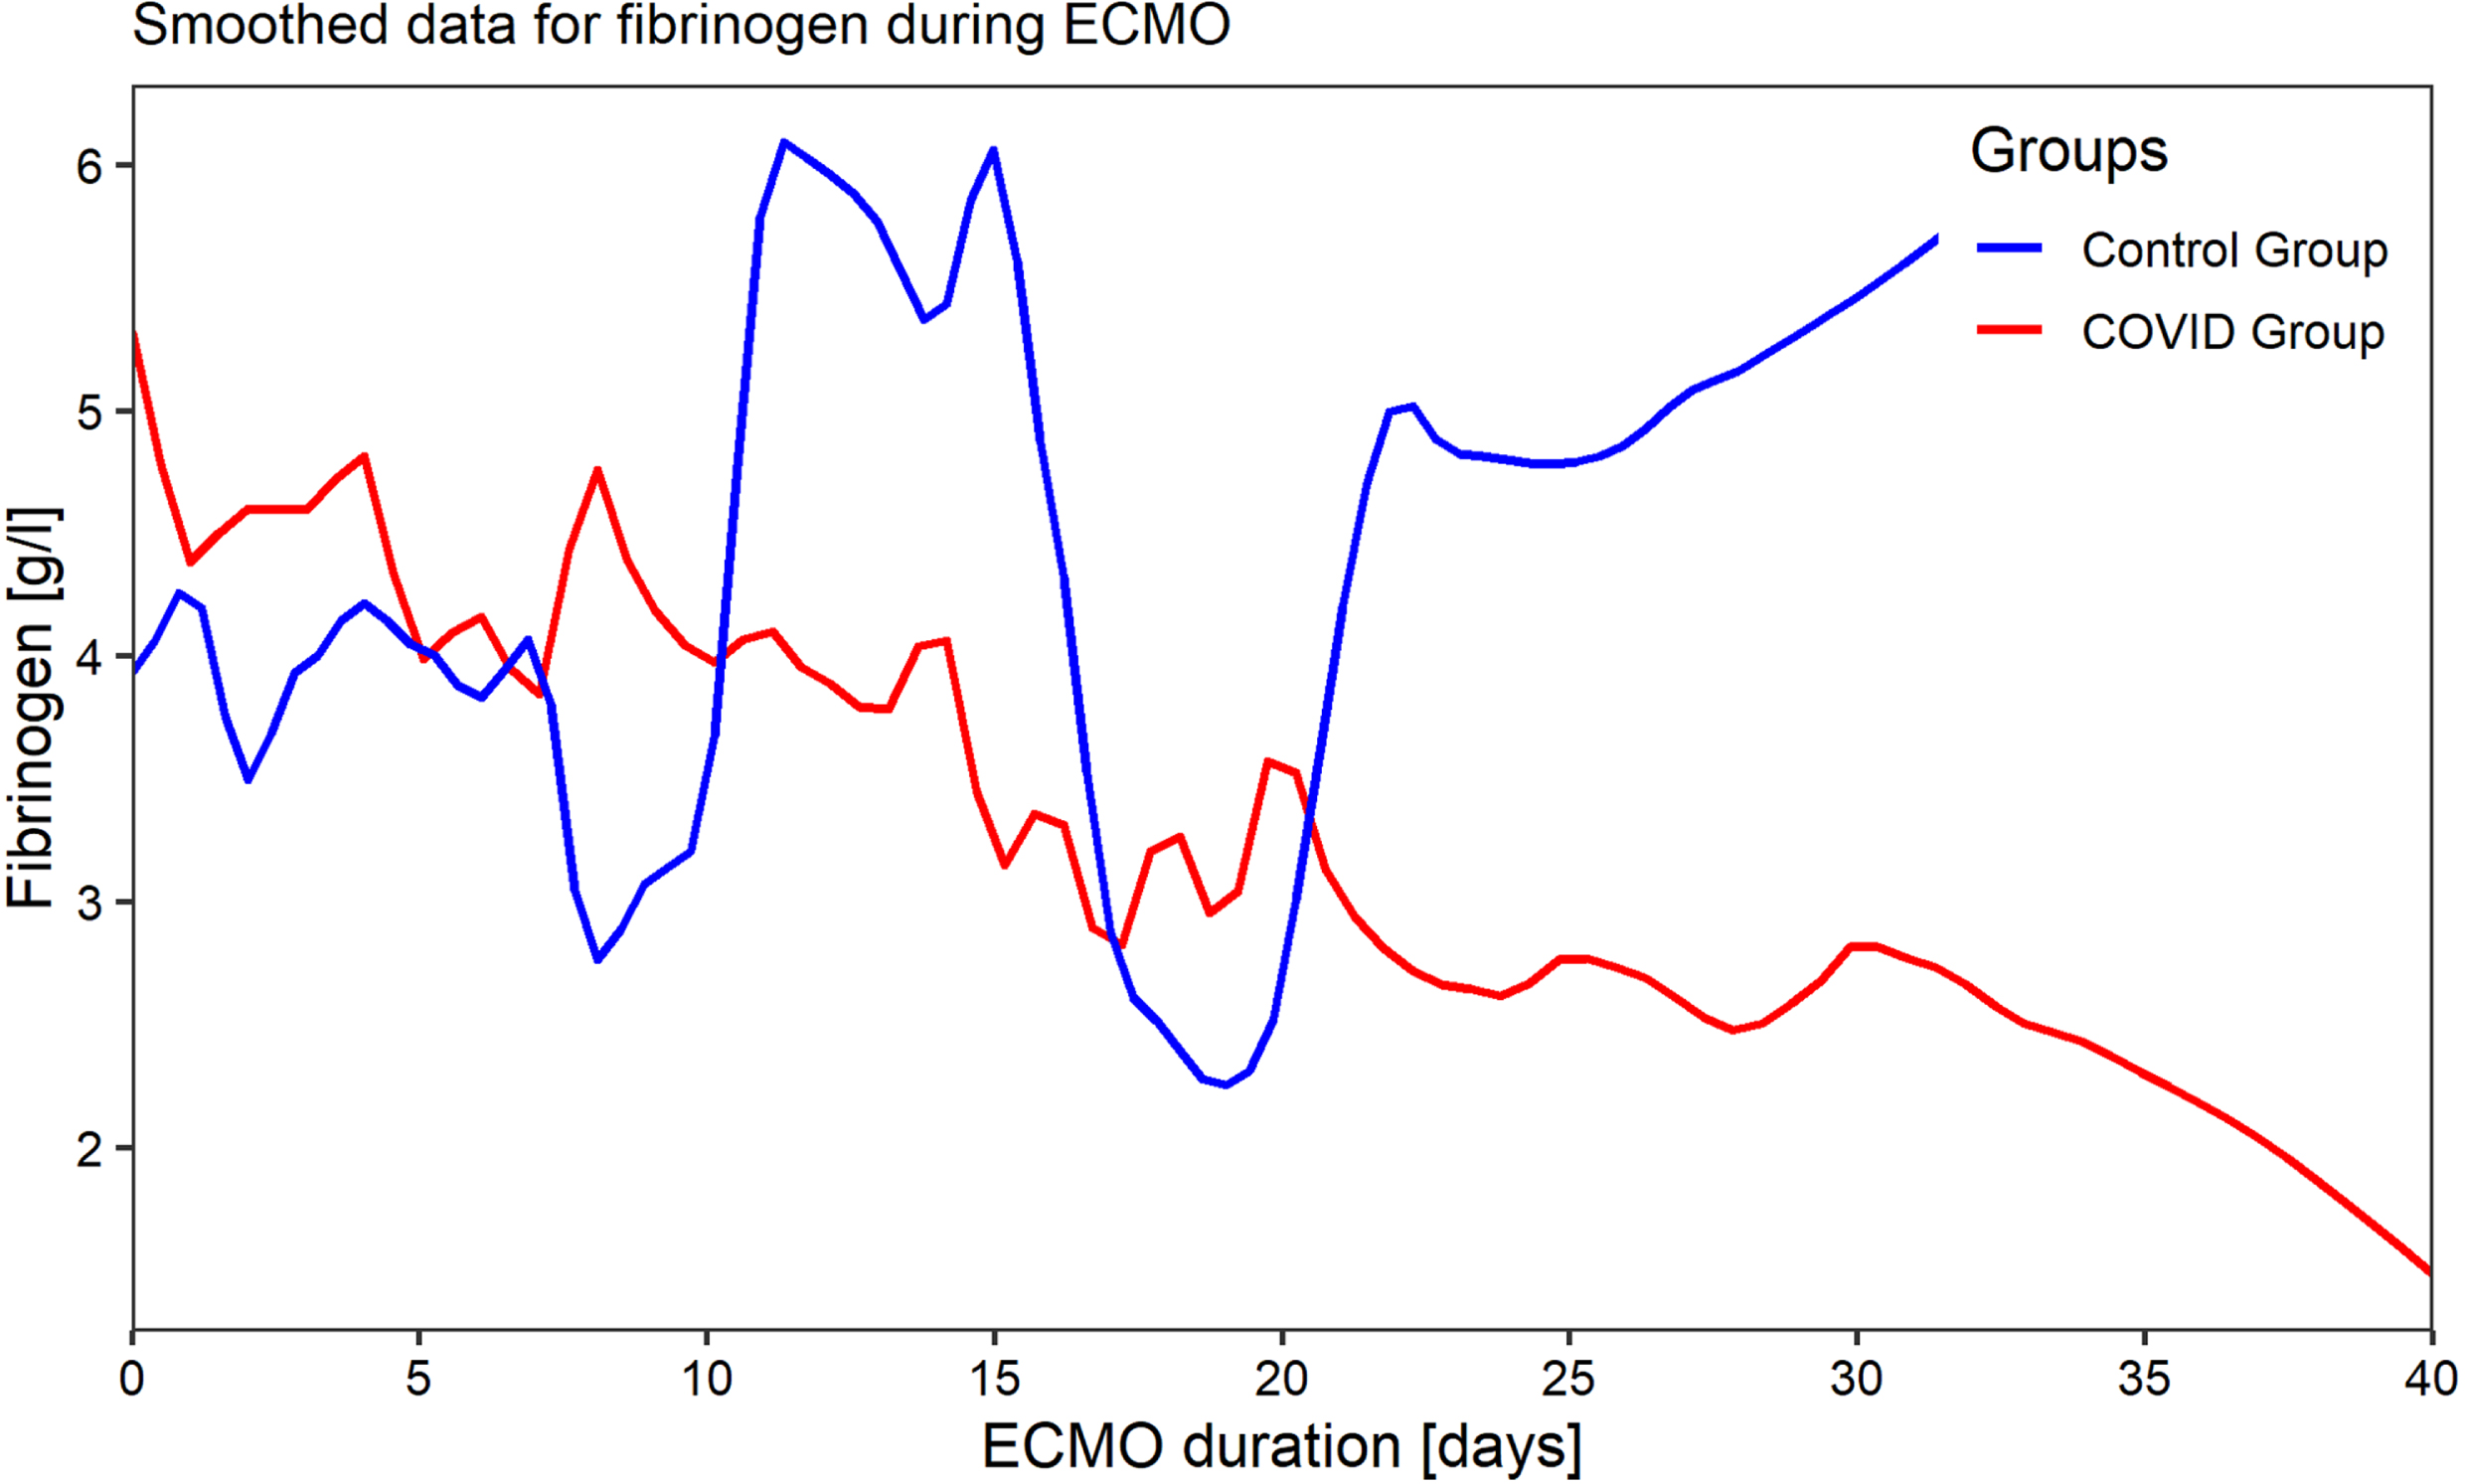 Fibrinogen levels over time show a steady consumption with a rapid change around day 10.